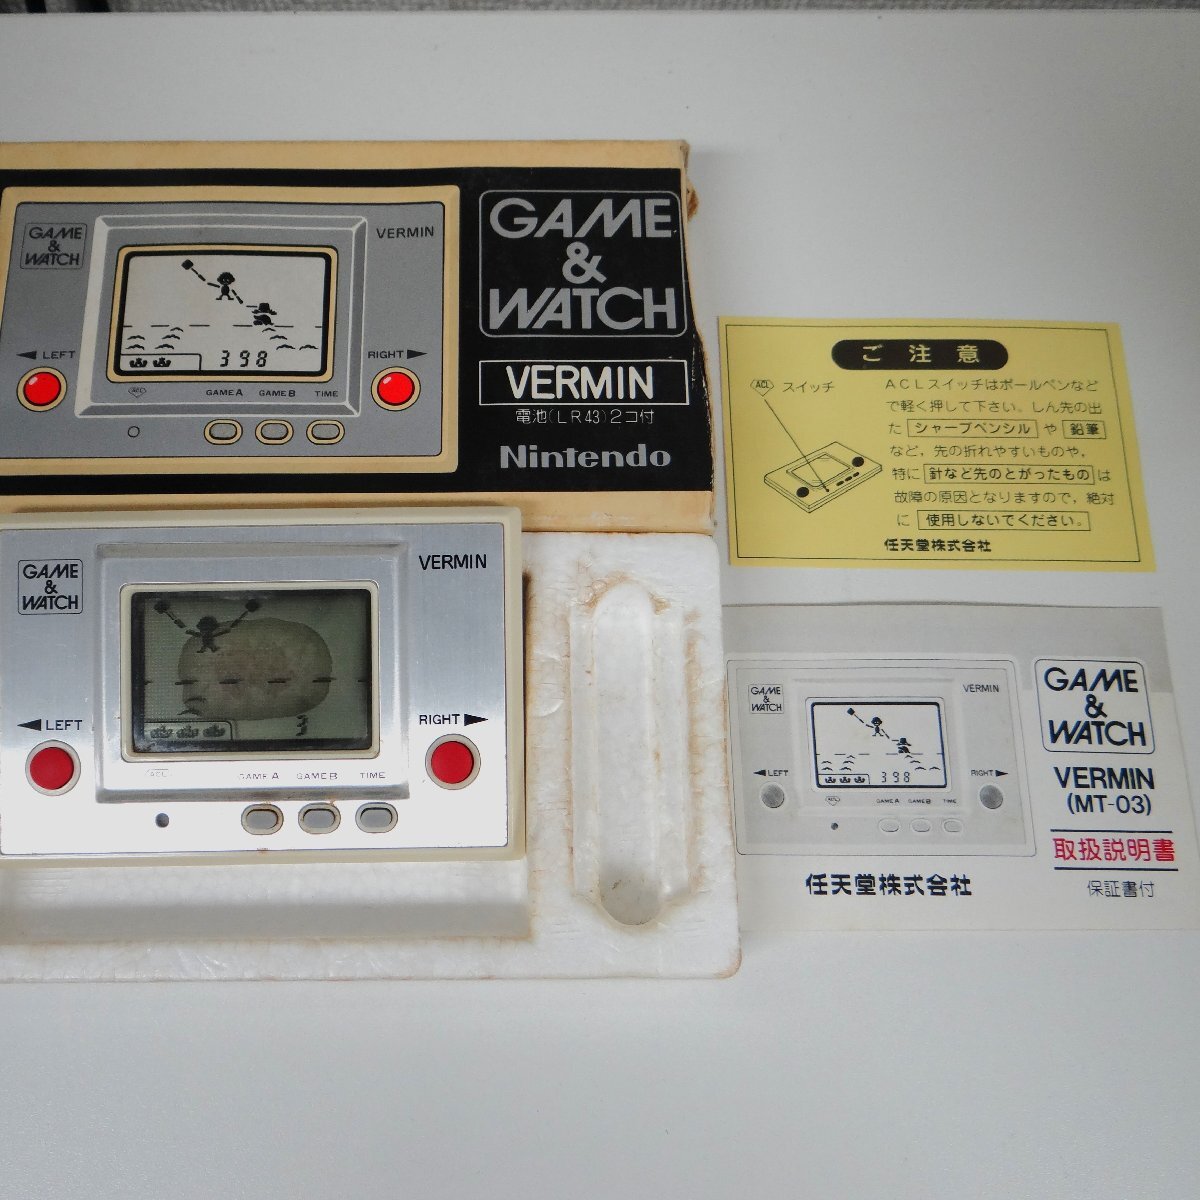 *....* secondhand goods * operation goods *GAME&WATCH/ Game & Watch VERMIN/ bar min box * instructions attaching retro small size game machine *6